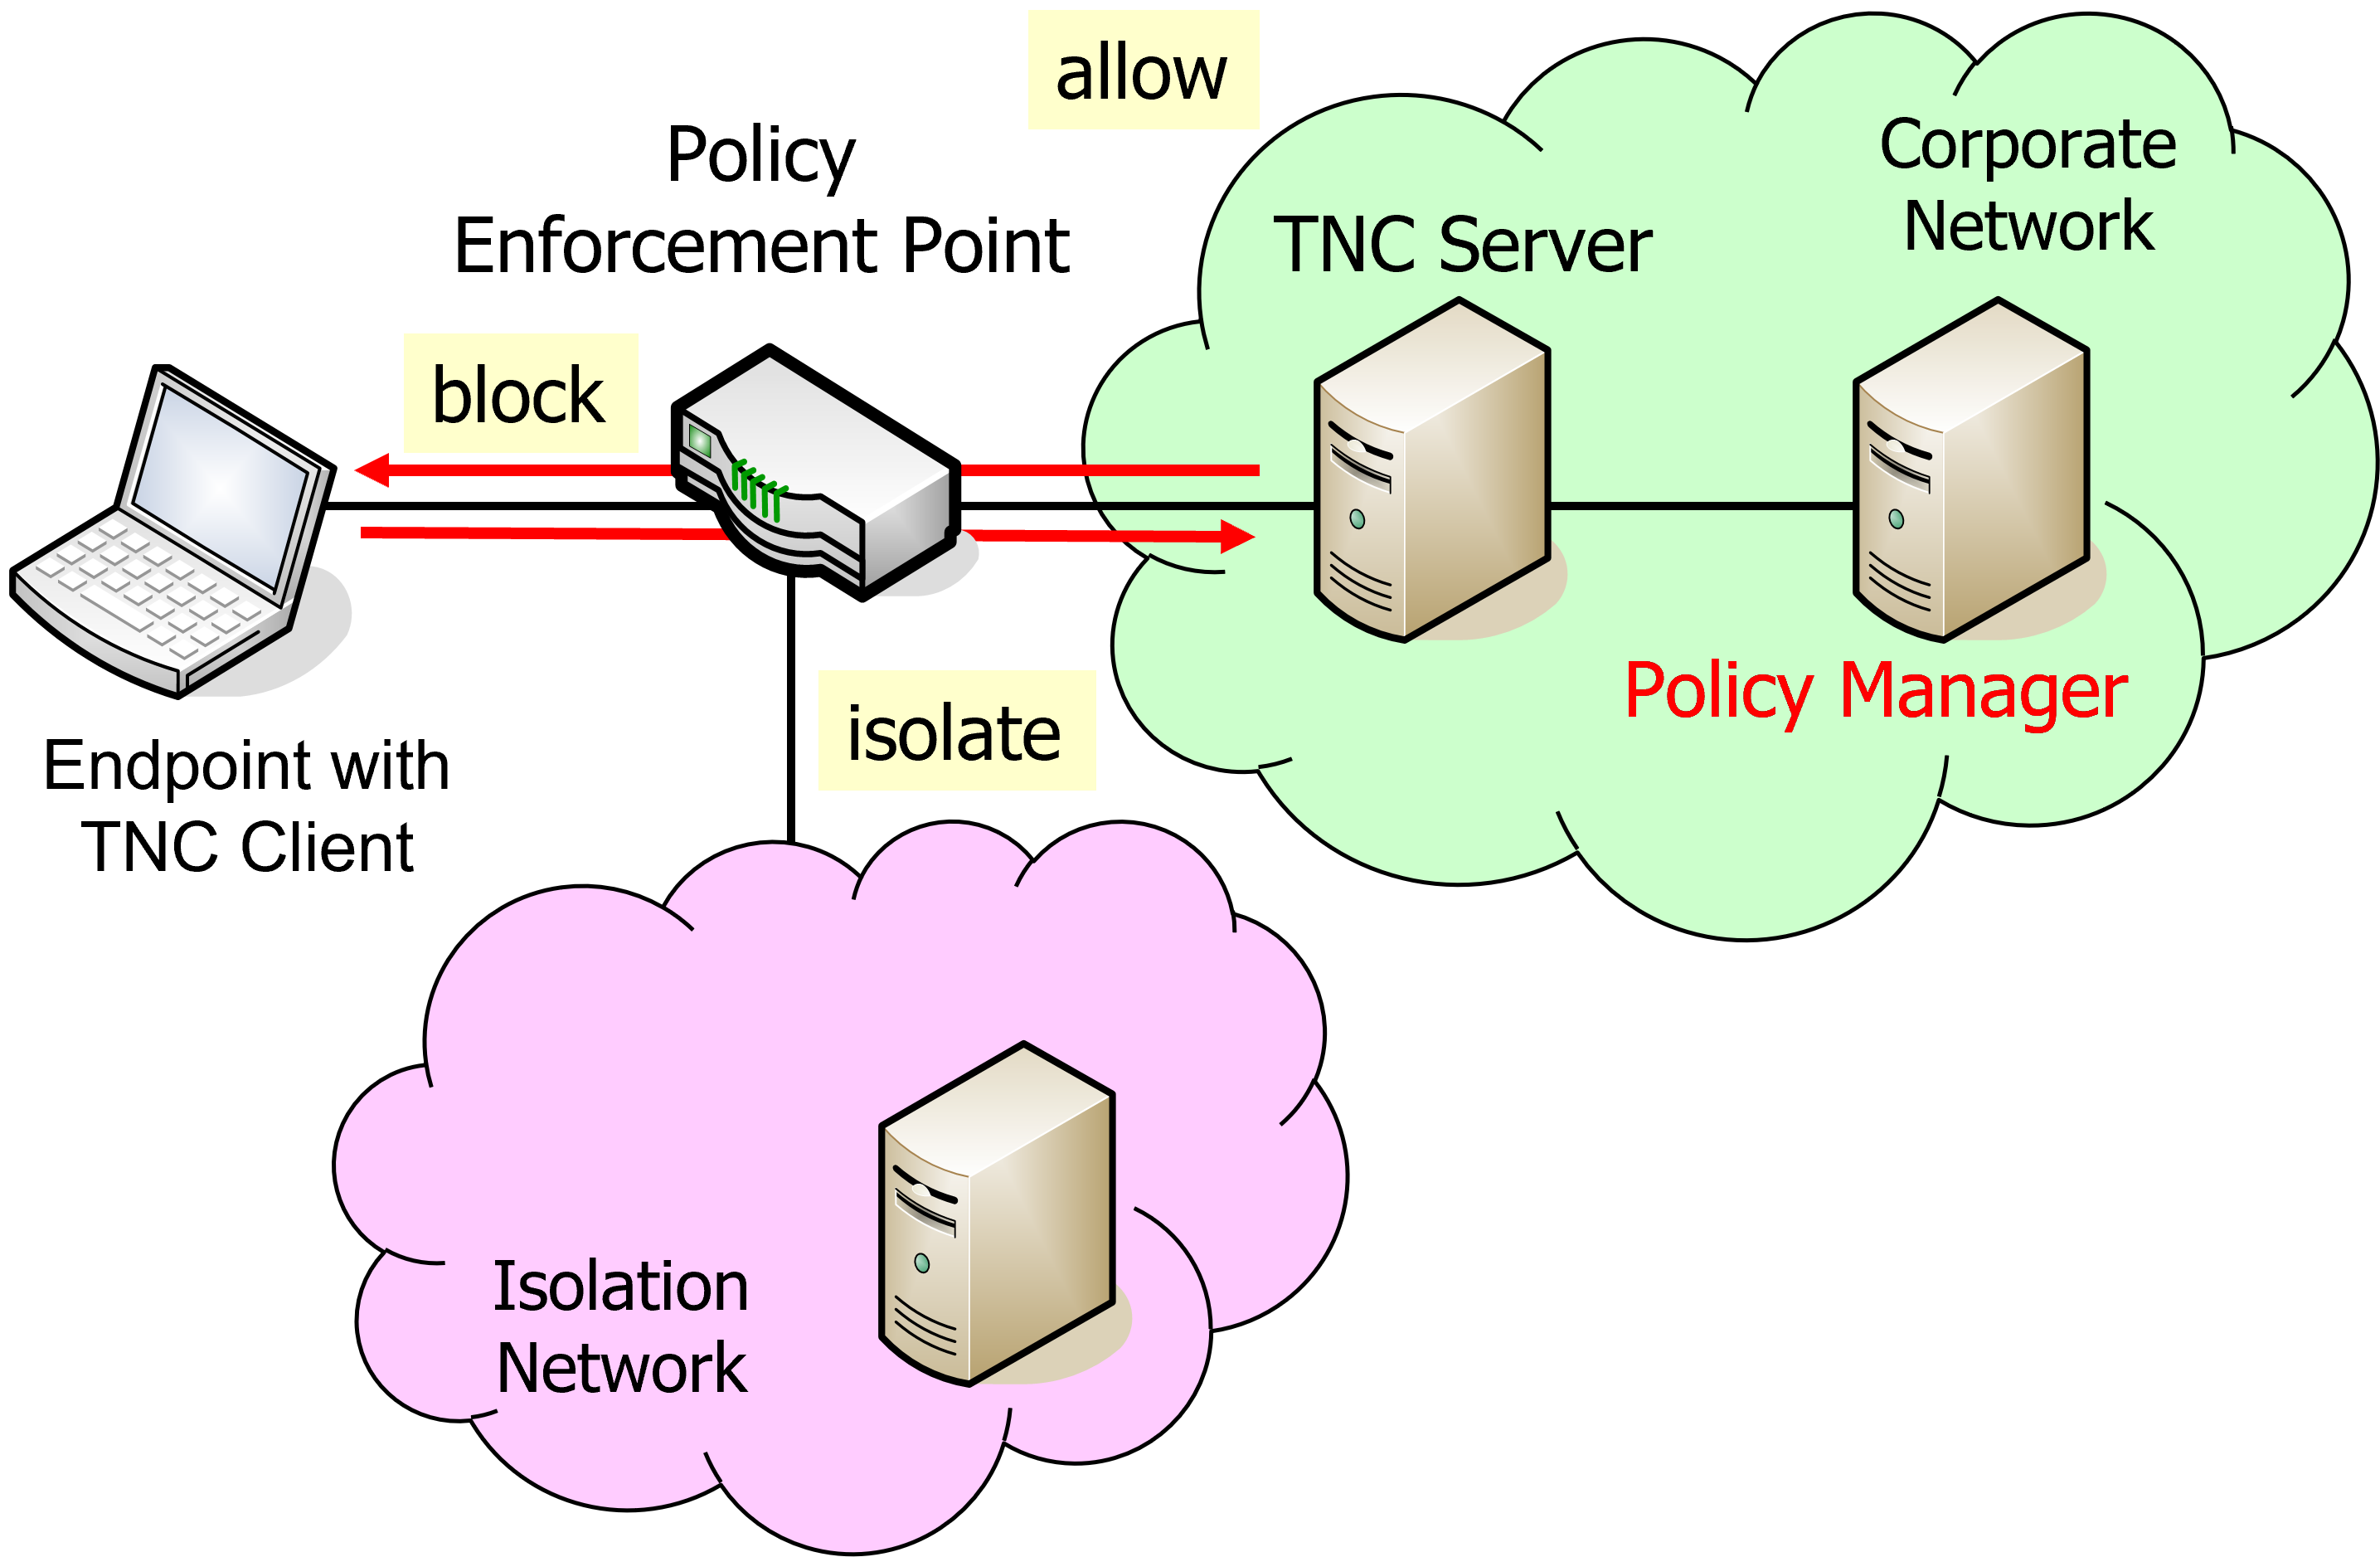 Network Access Control